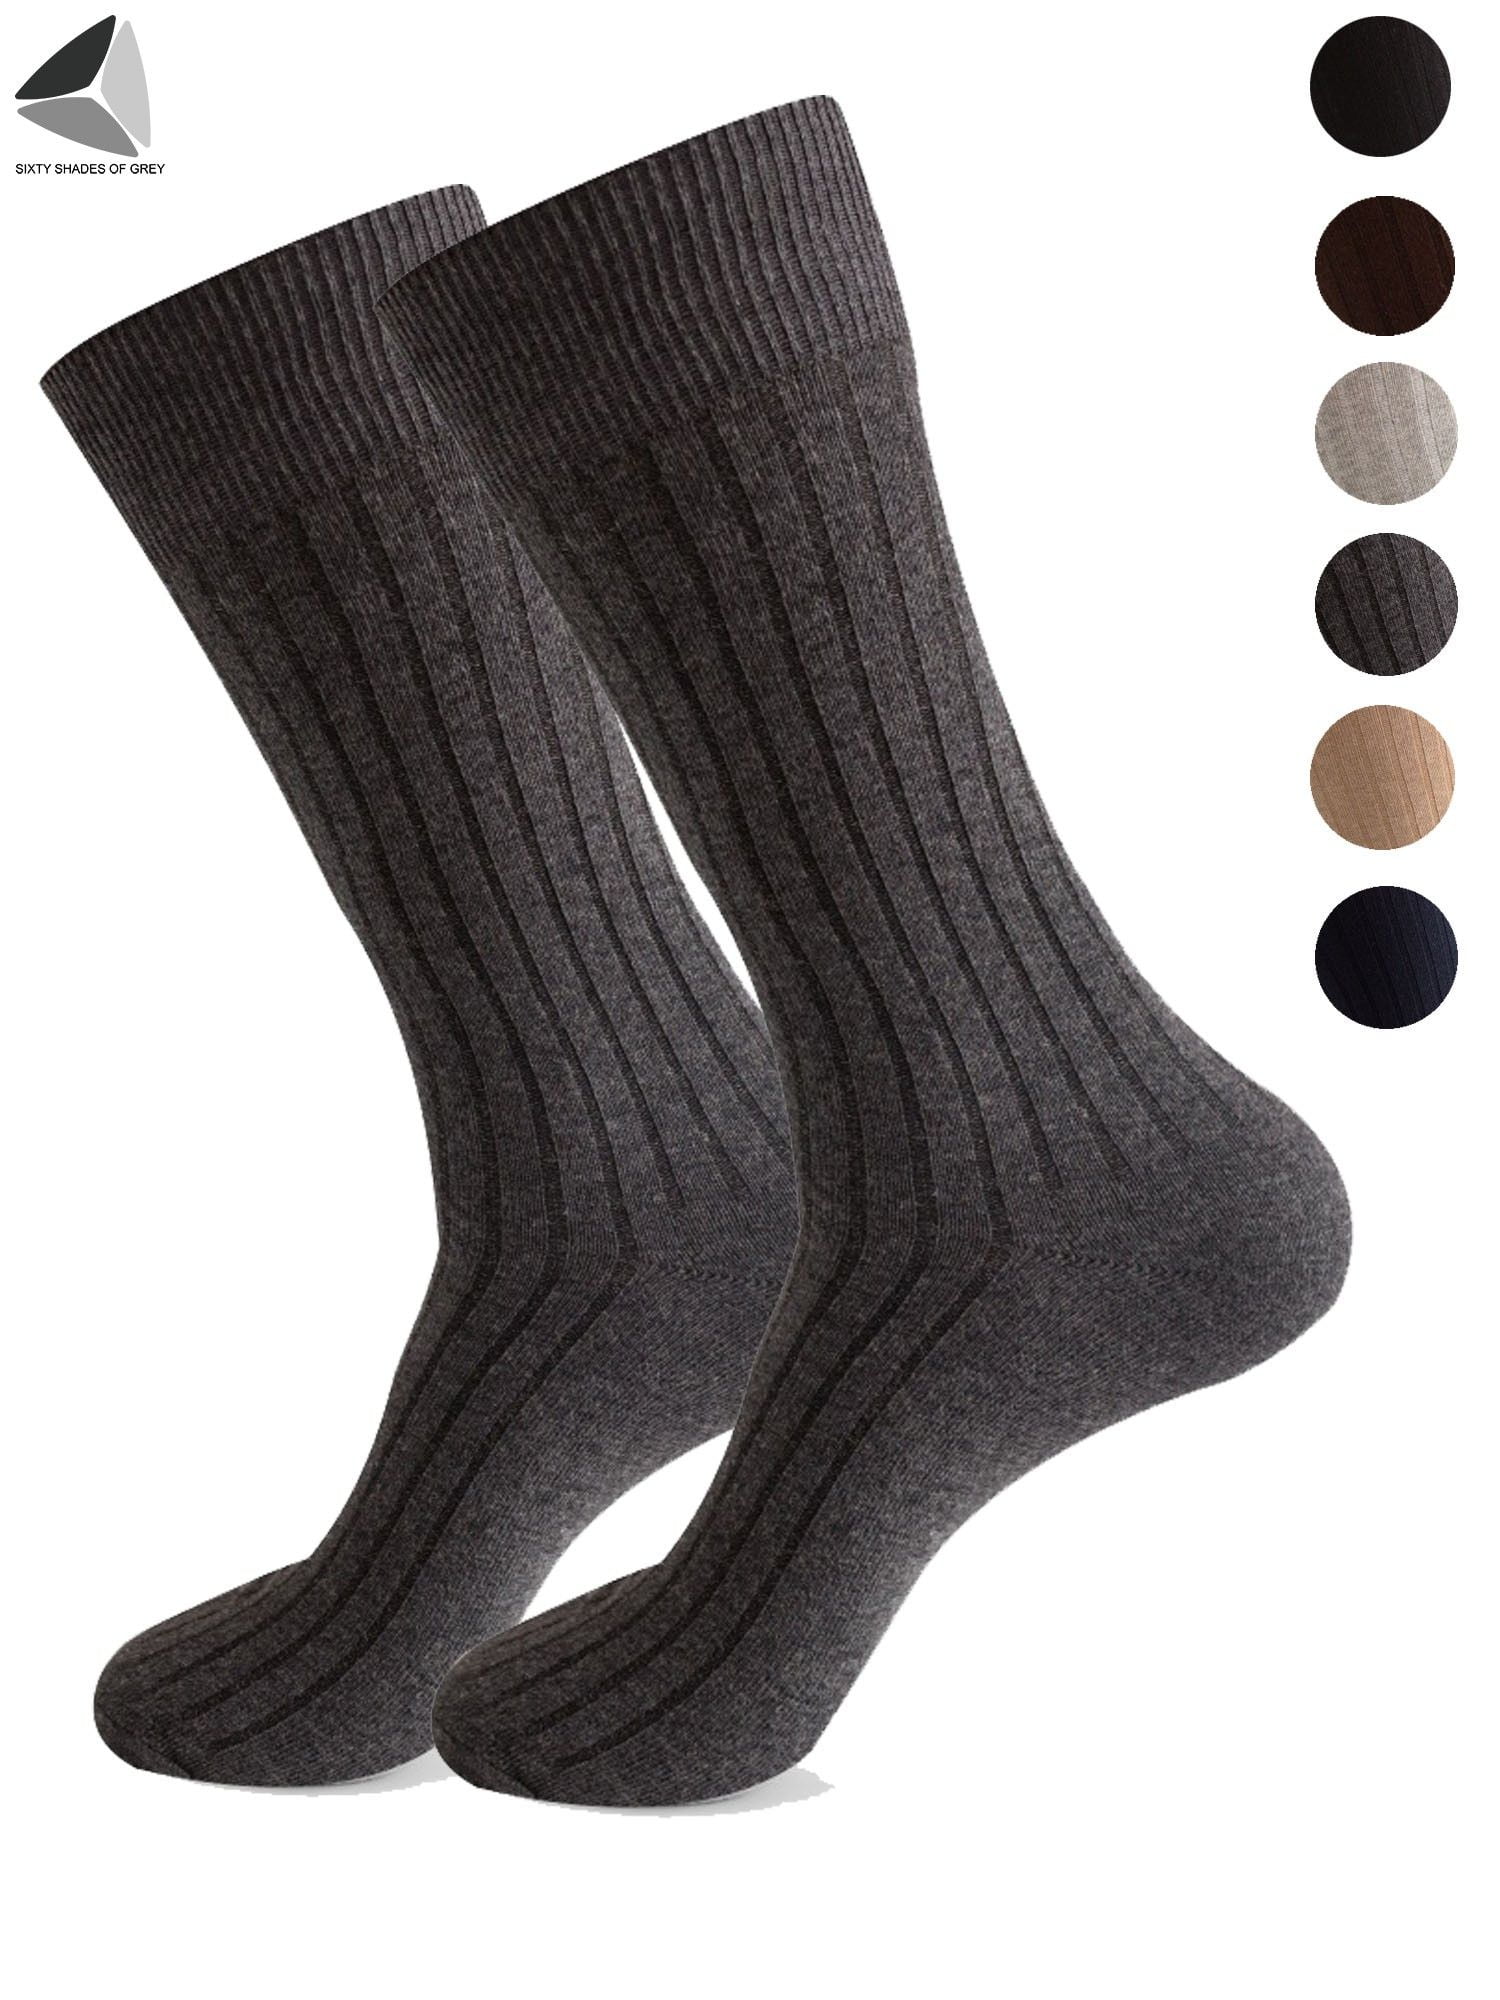 Winter Warm Unisex Sports Argyle Athletic Crew Socks for Fans One Size Fits Most 